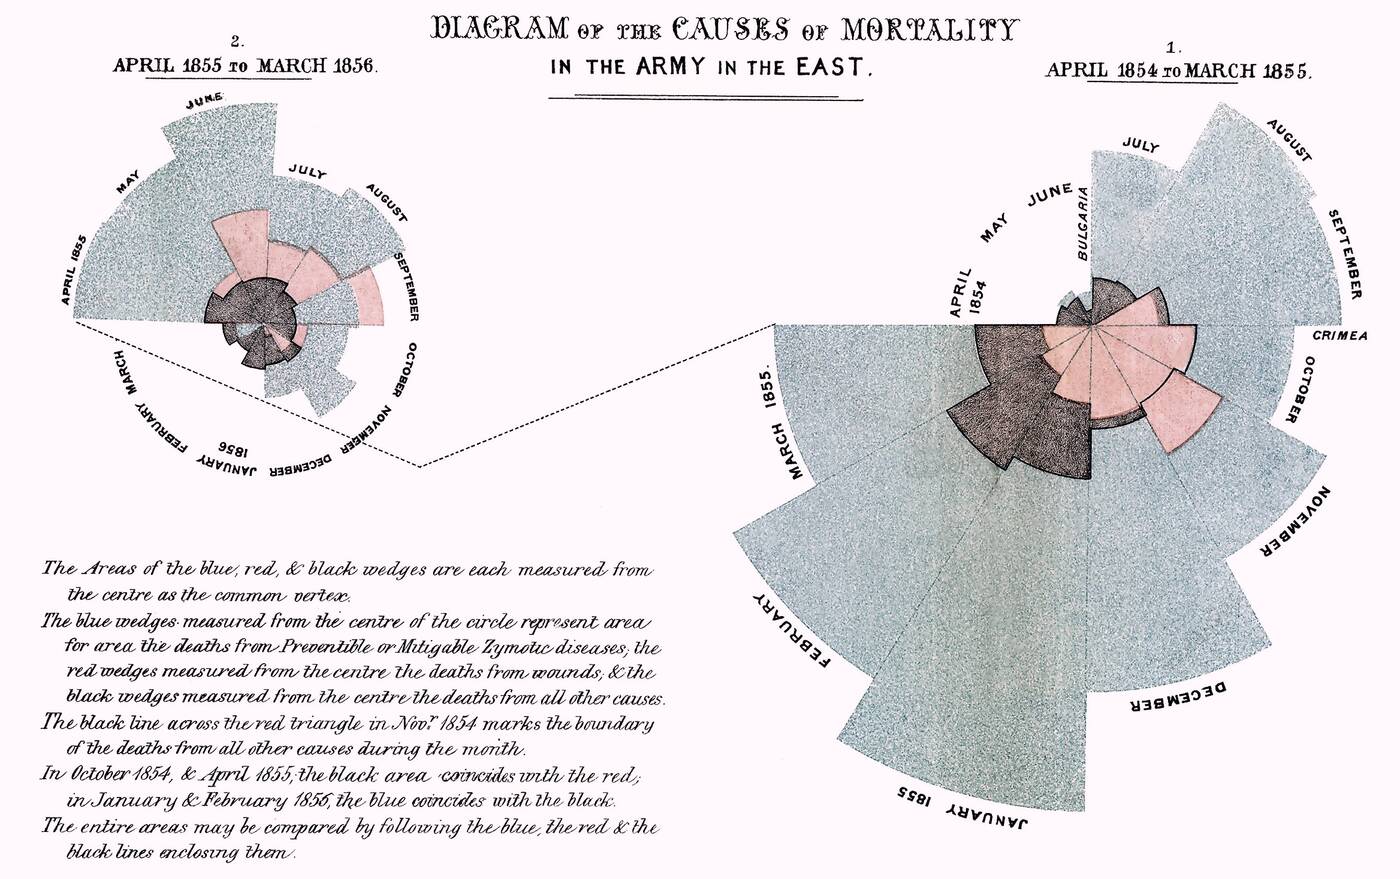 This classic data visualization example was created by Florence Nightingale